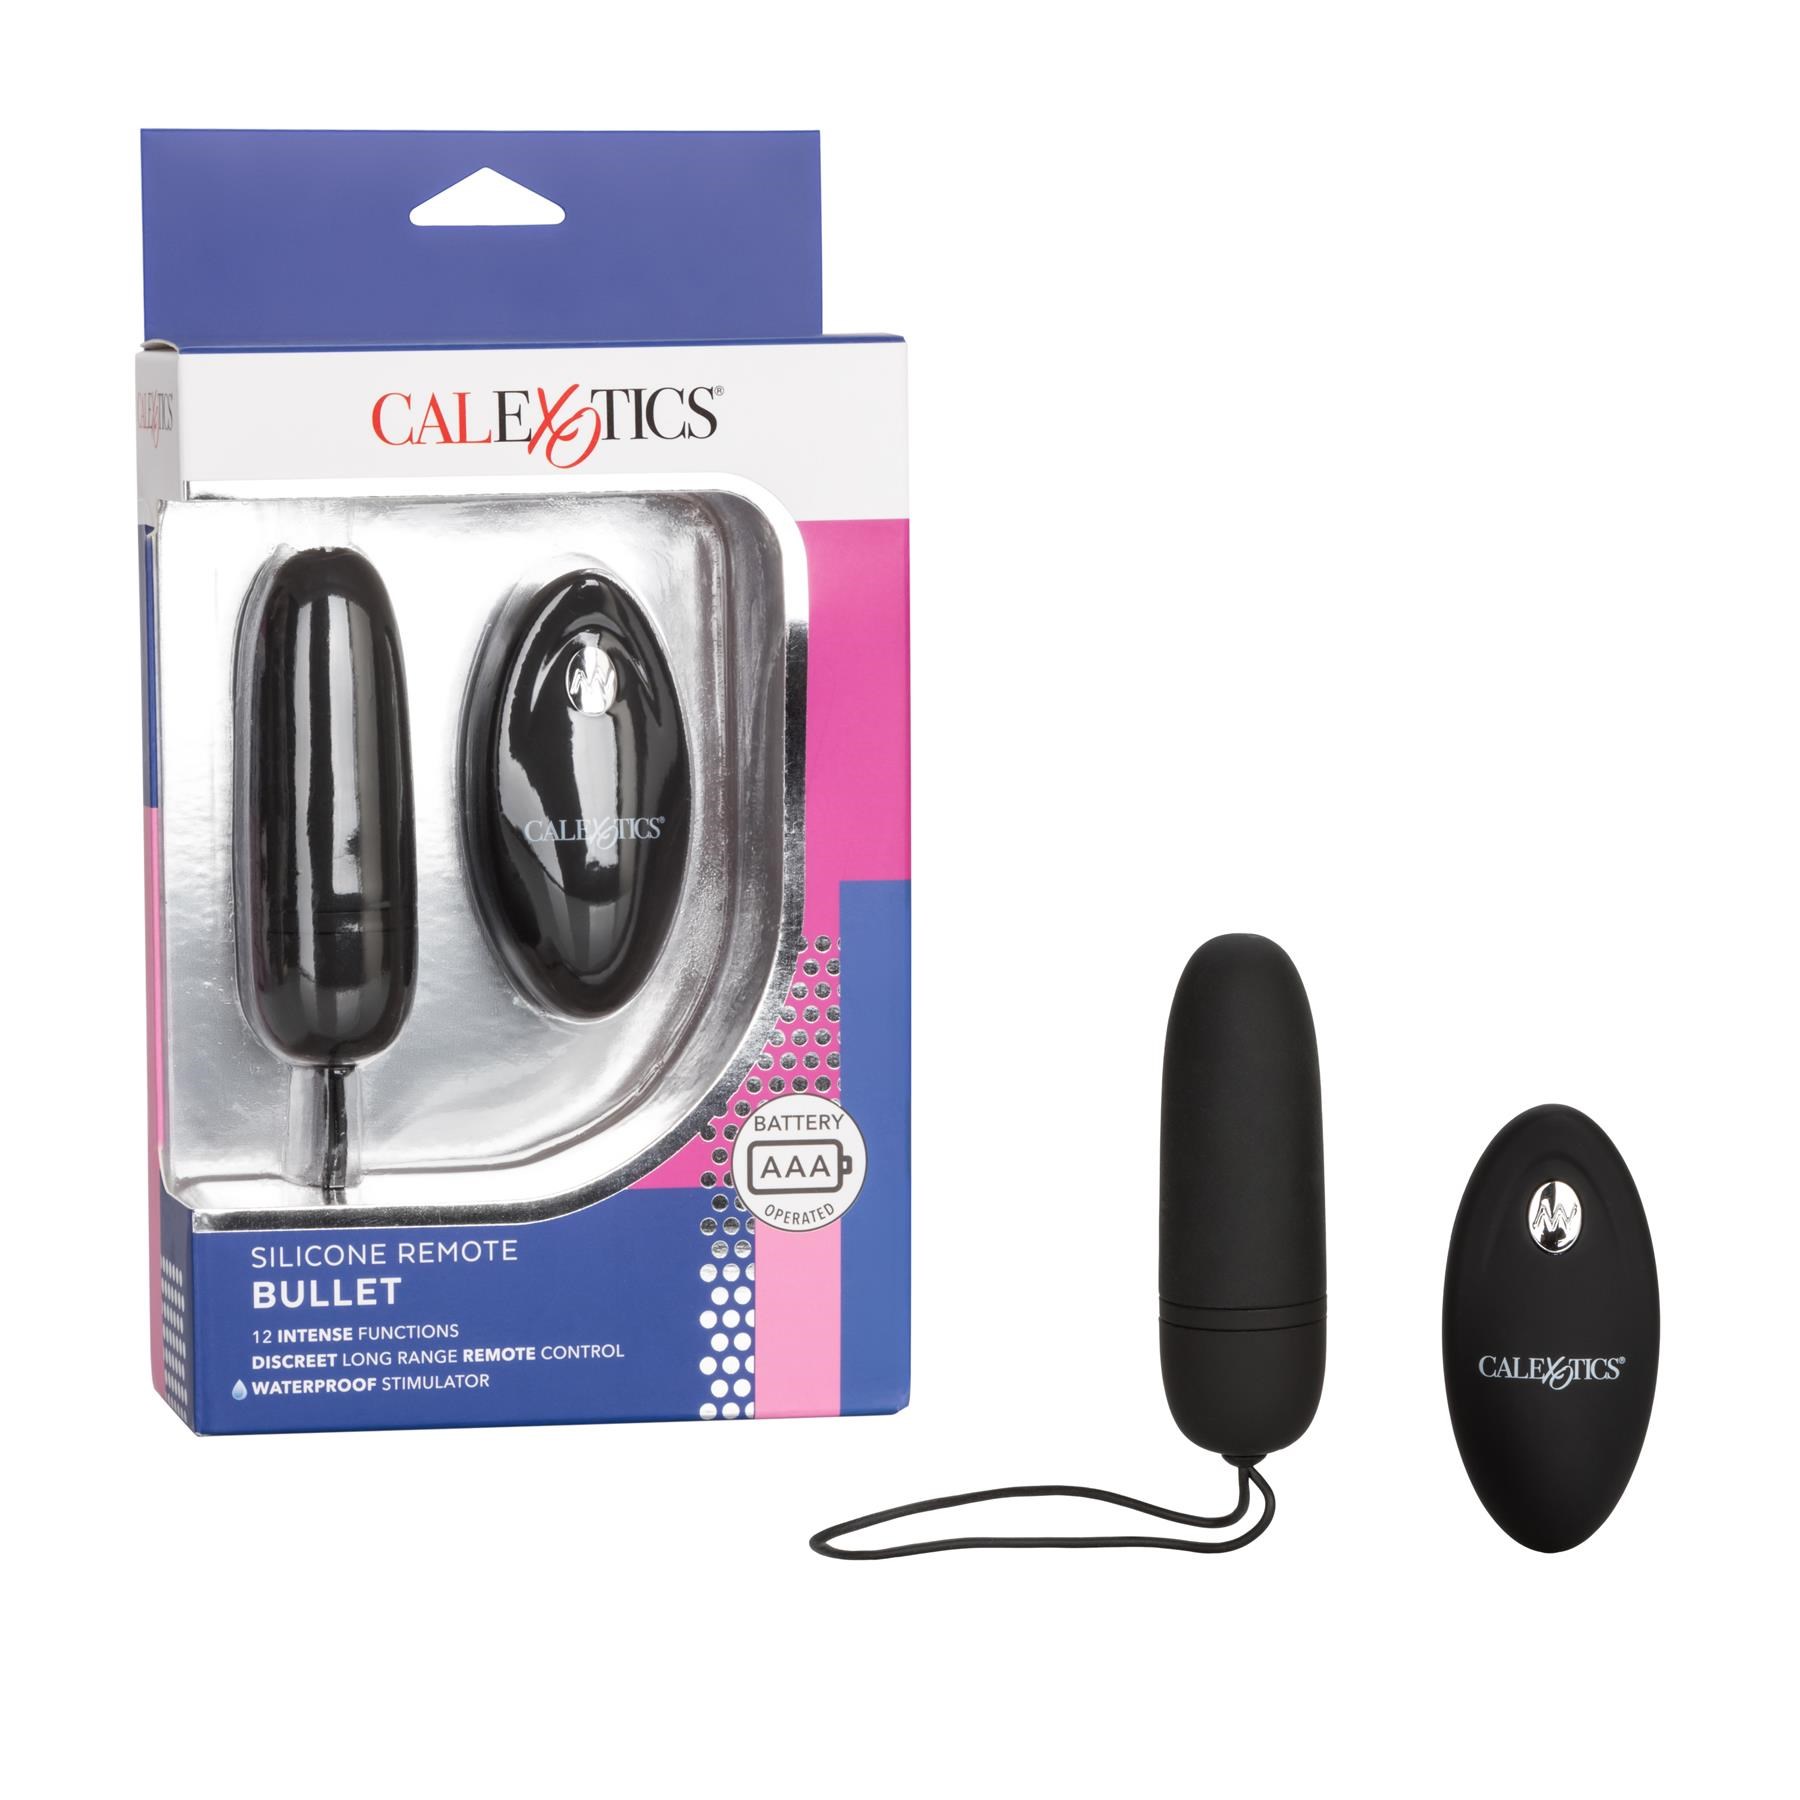 Silicone Remote Bullet - Product and Packaging